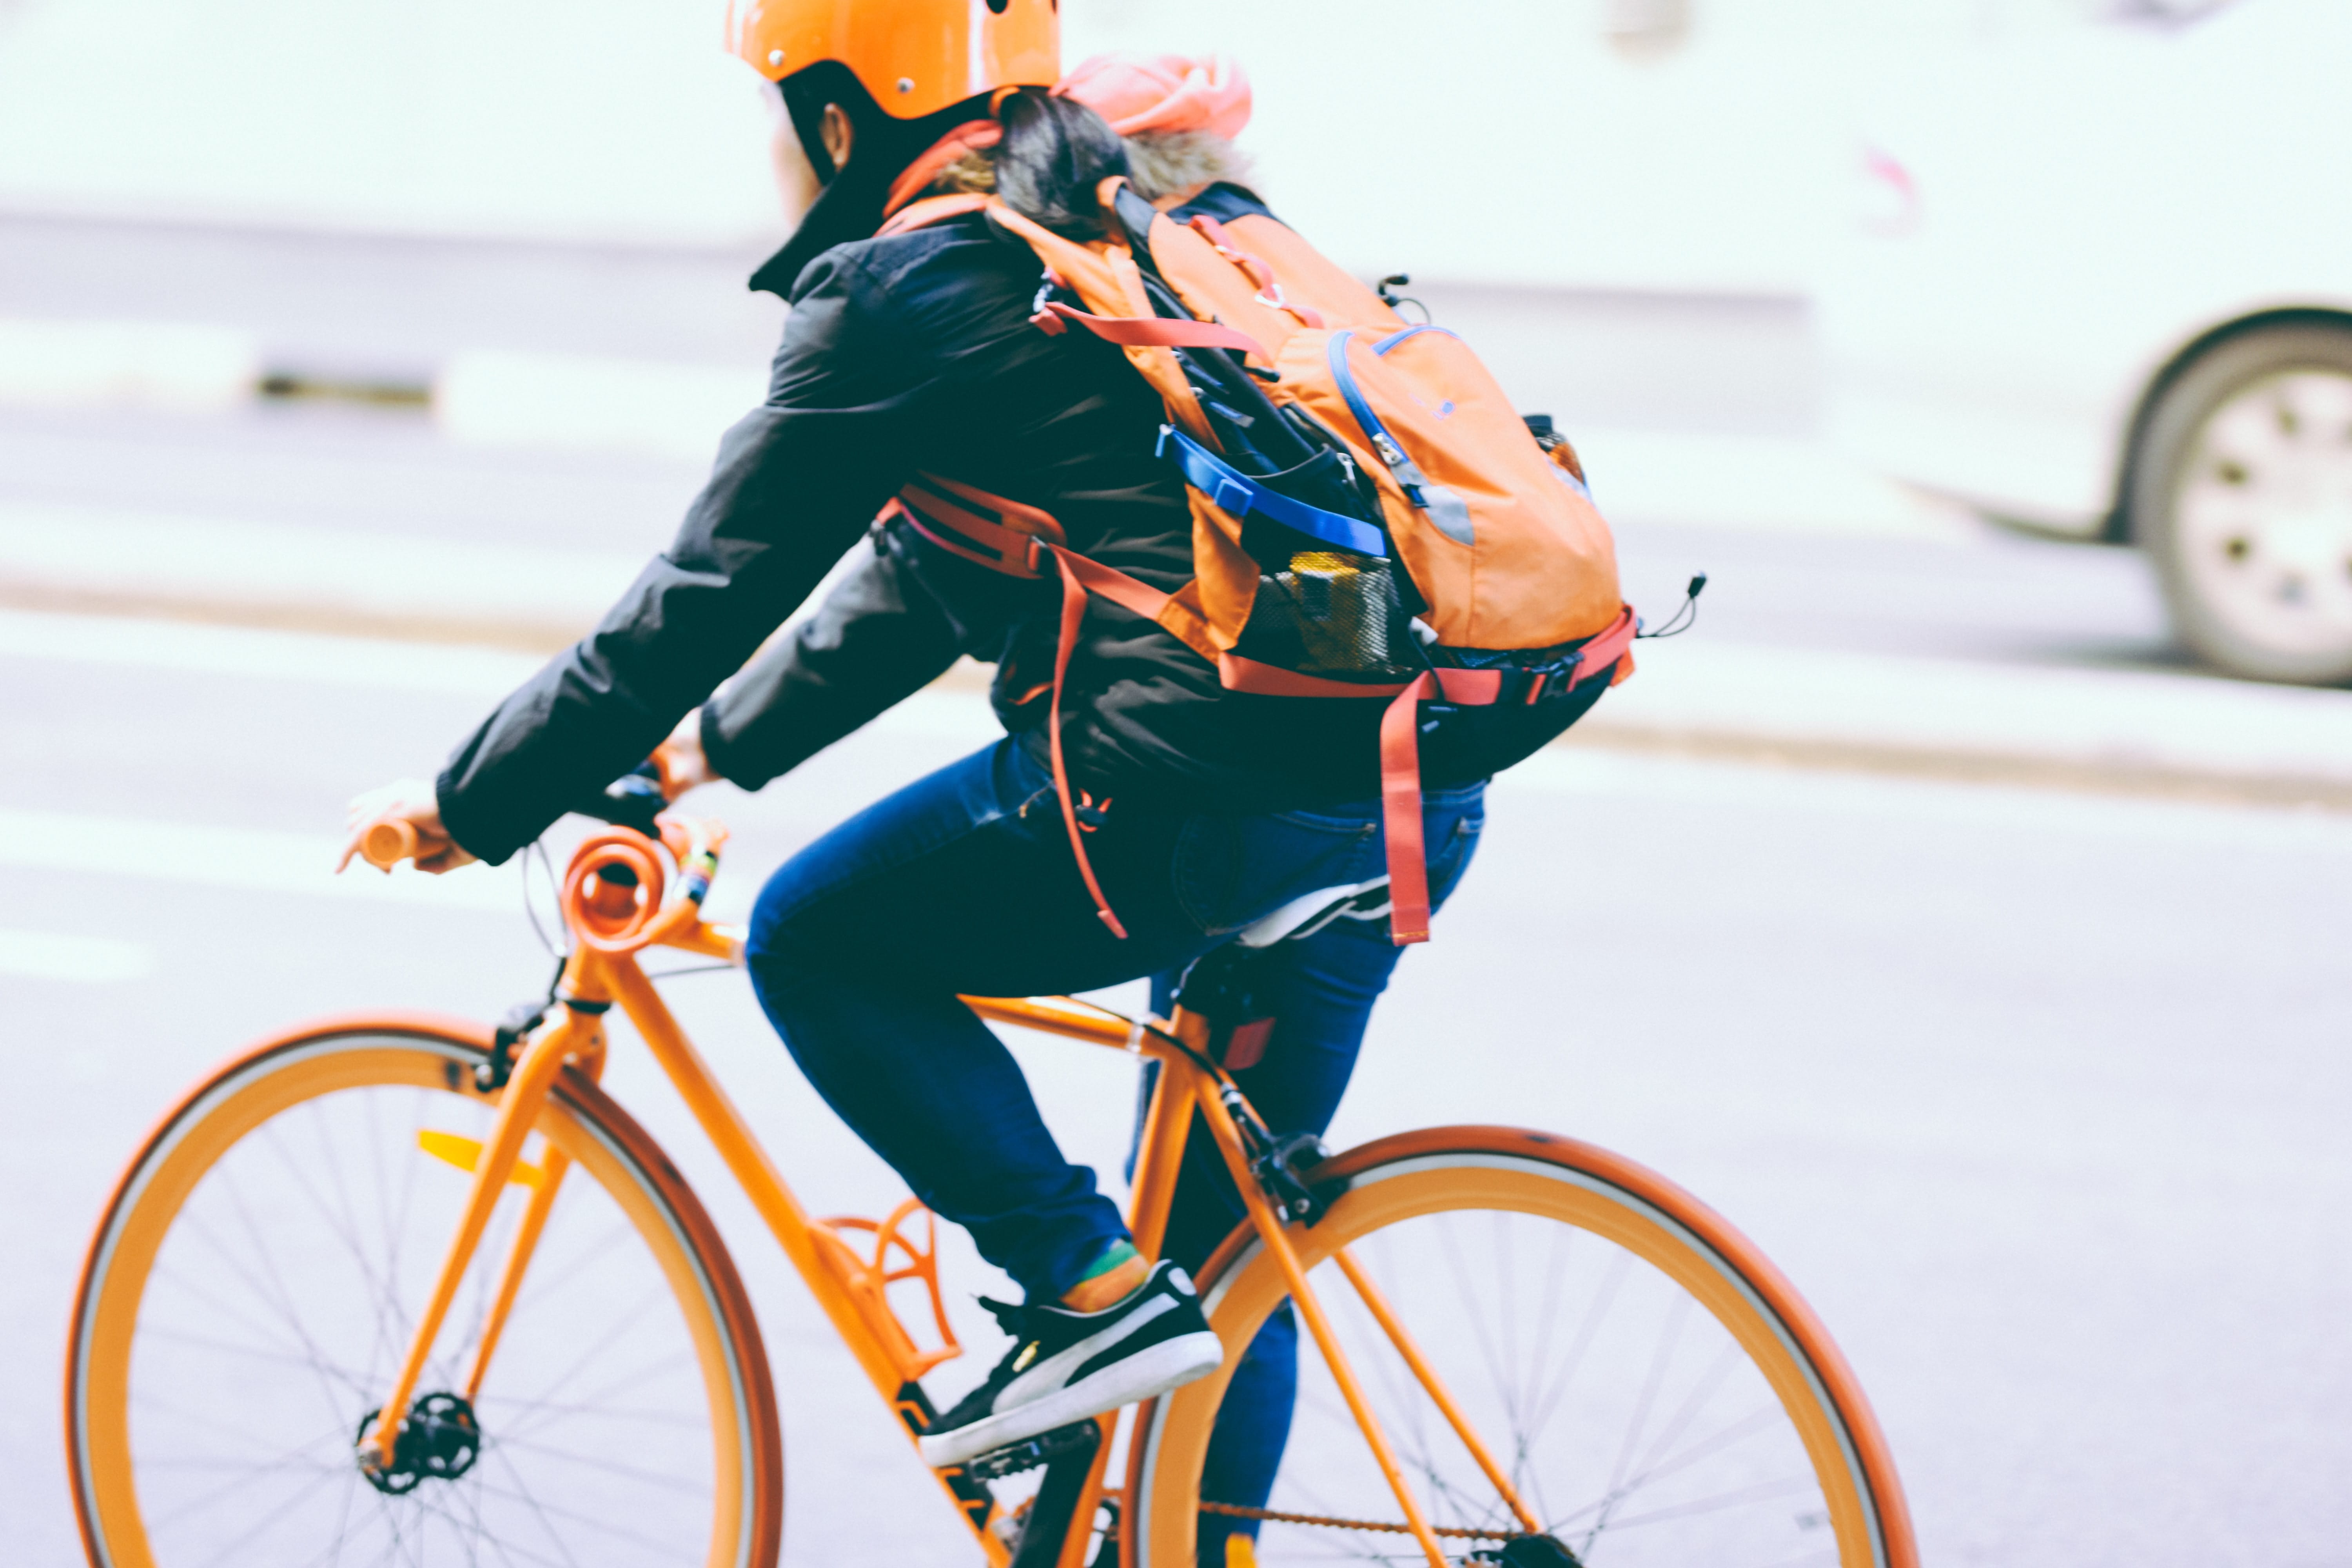 Agency Pushes for All Cyclists to Wear a Helmet